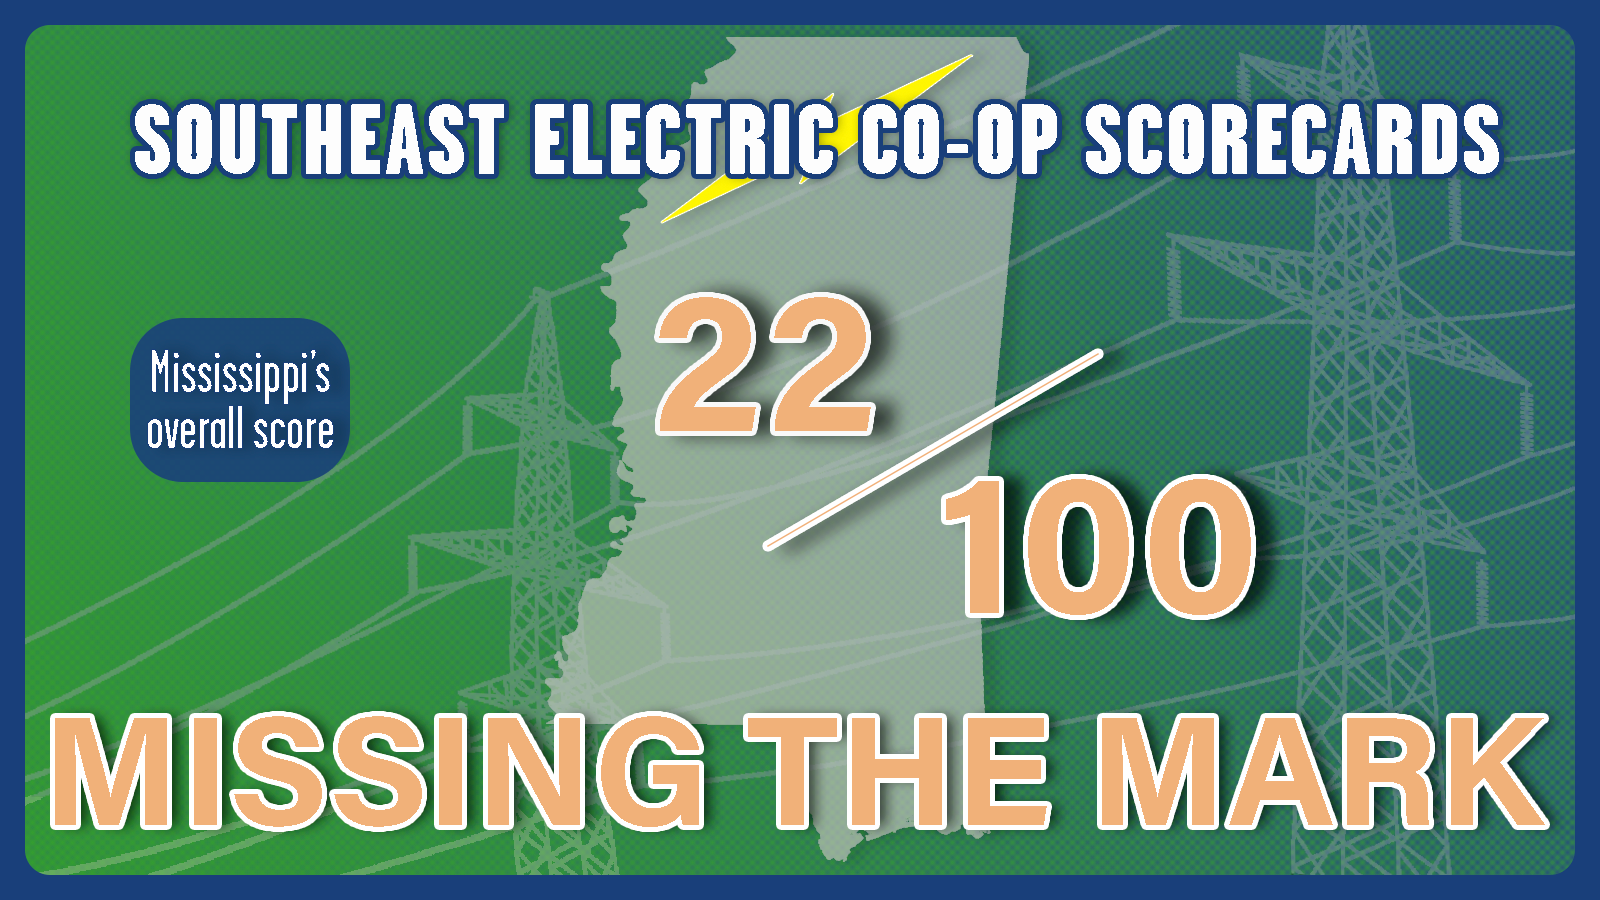 Mississippi's overal electric cooperative score